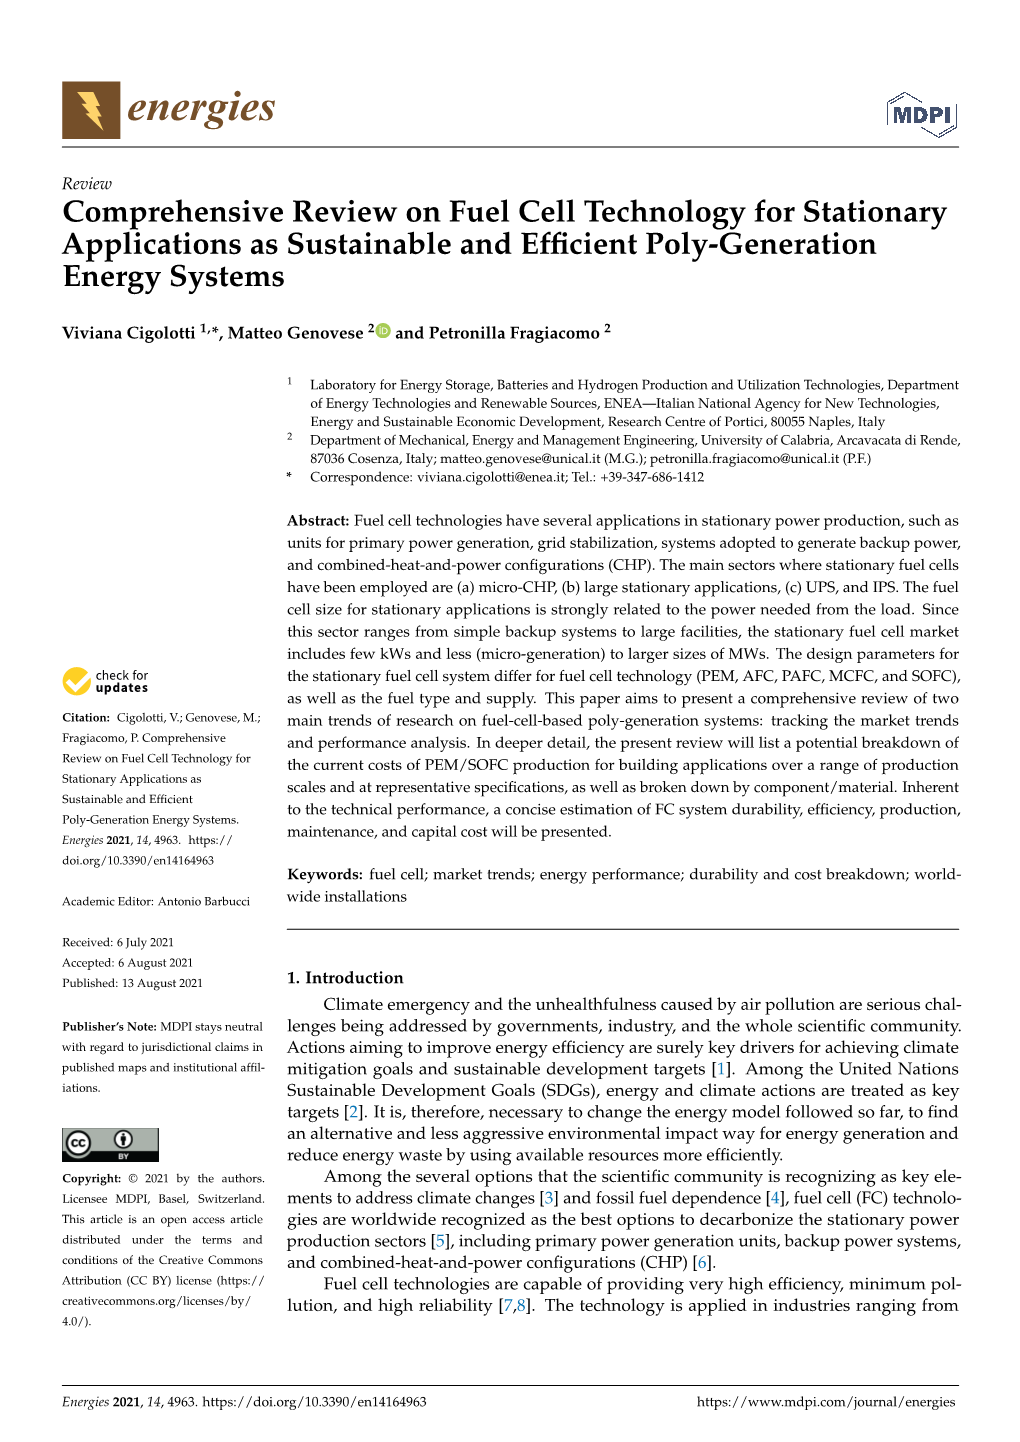 Comprehensive Review on Fuel Cell Technology for Stationary Applications As Sustainable and Efﬁcient Poly-Generation Energy Systems